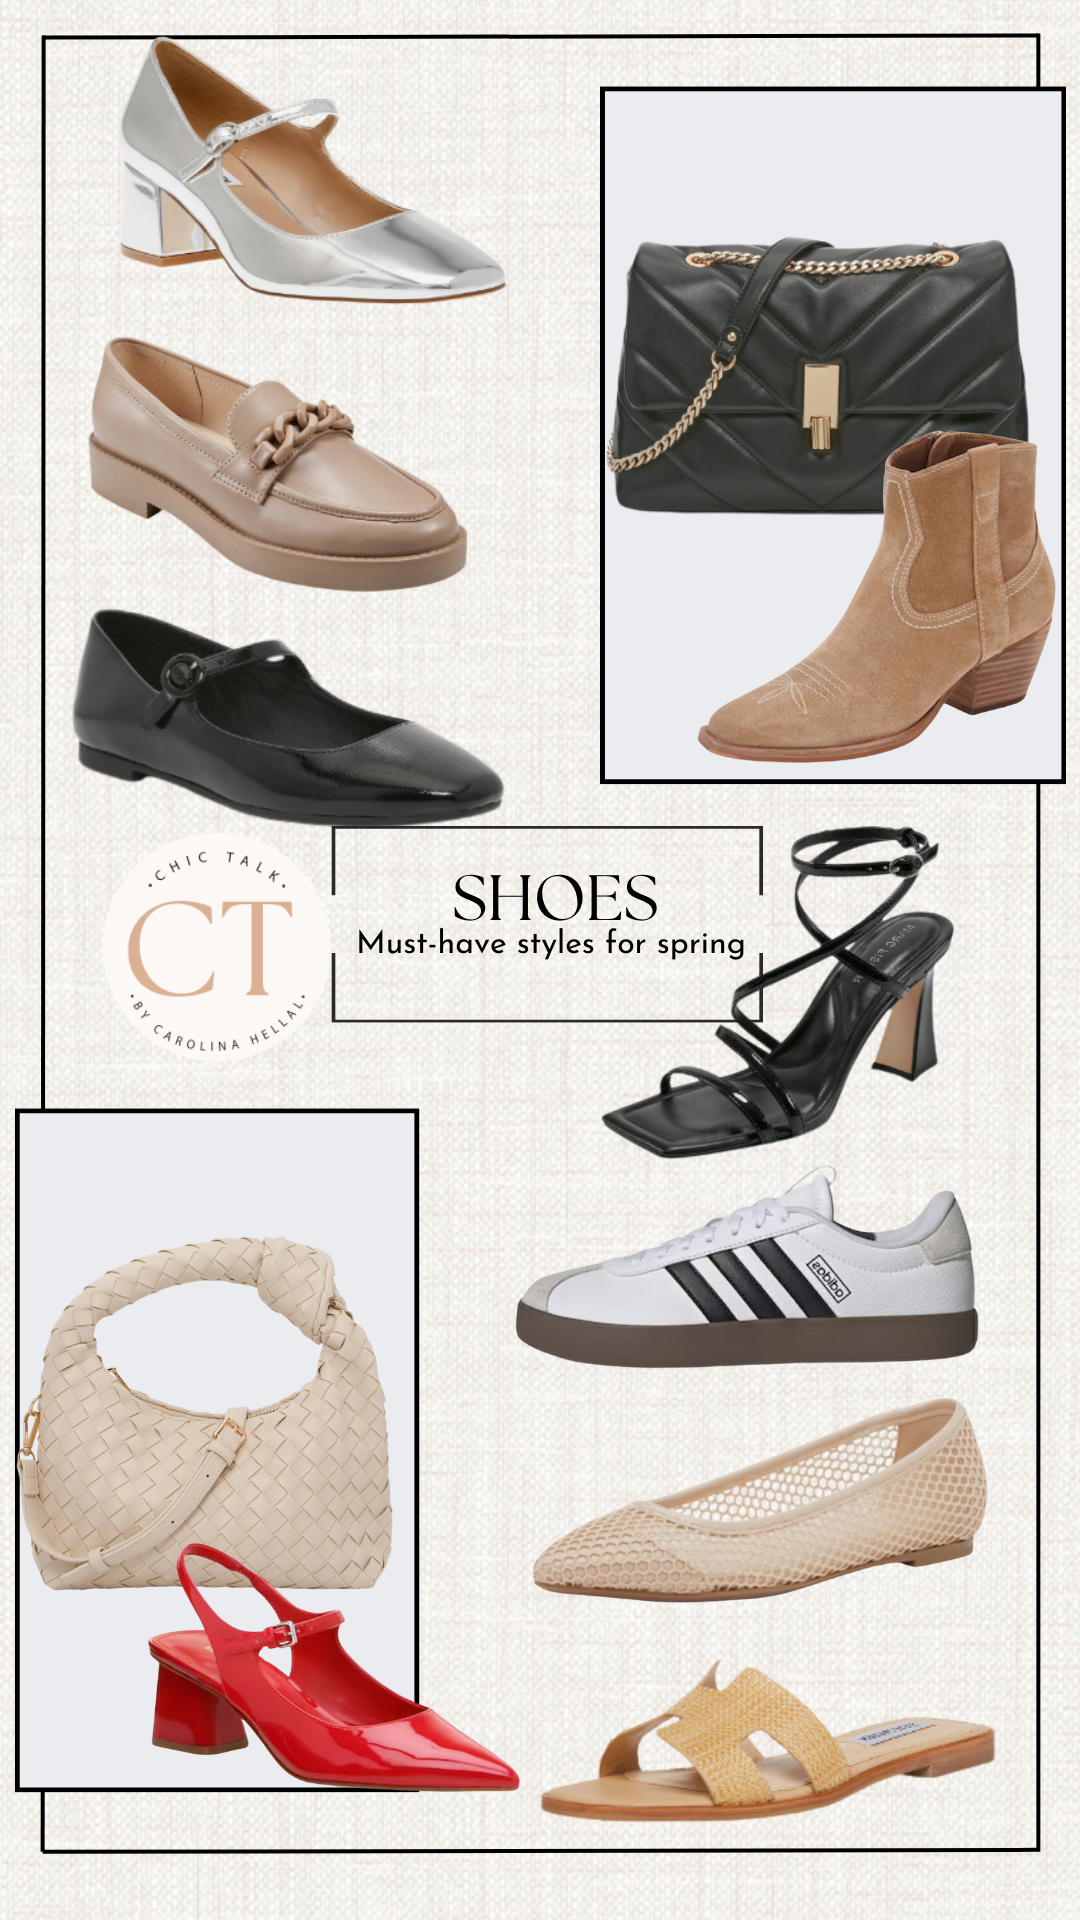 MUST-HAVE SPRING SHOES VIA DSW - CHIC TALK